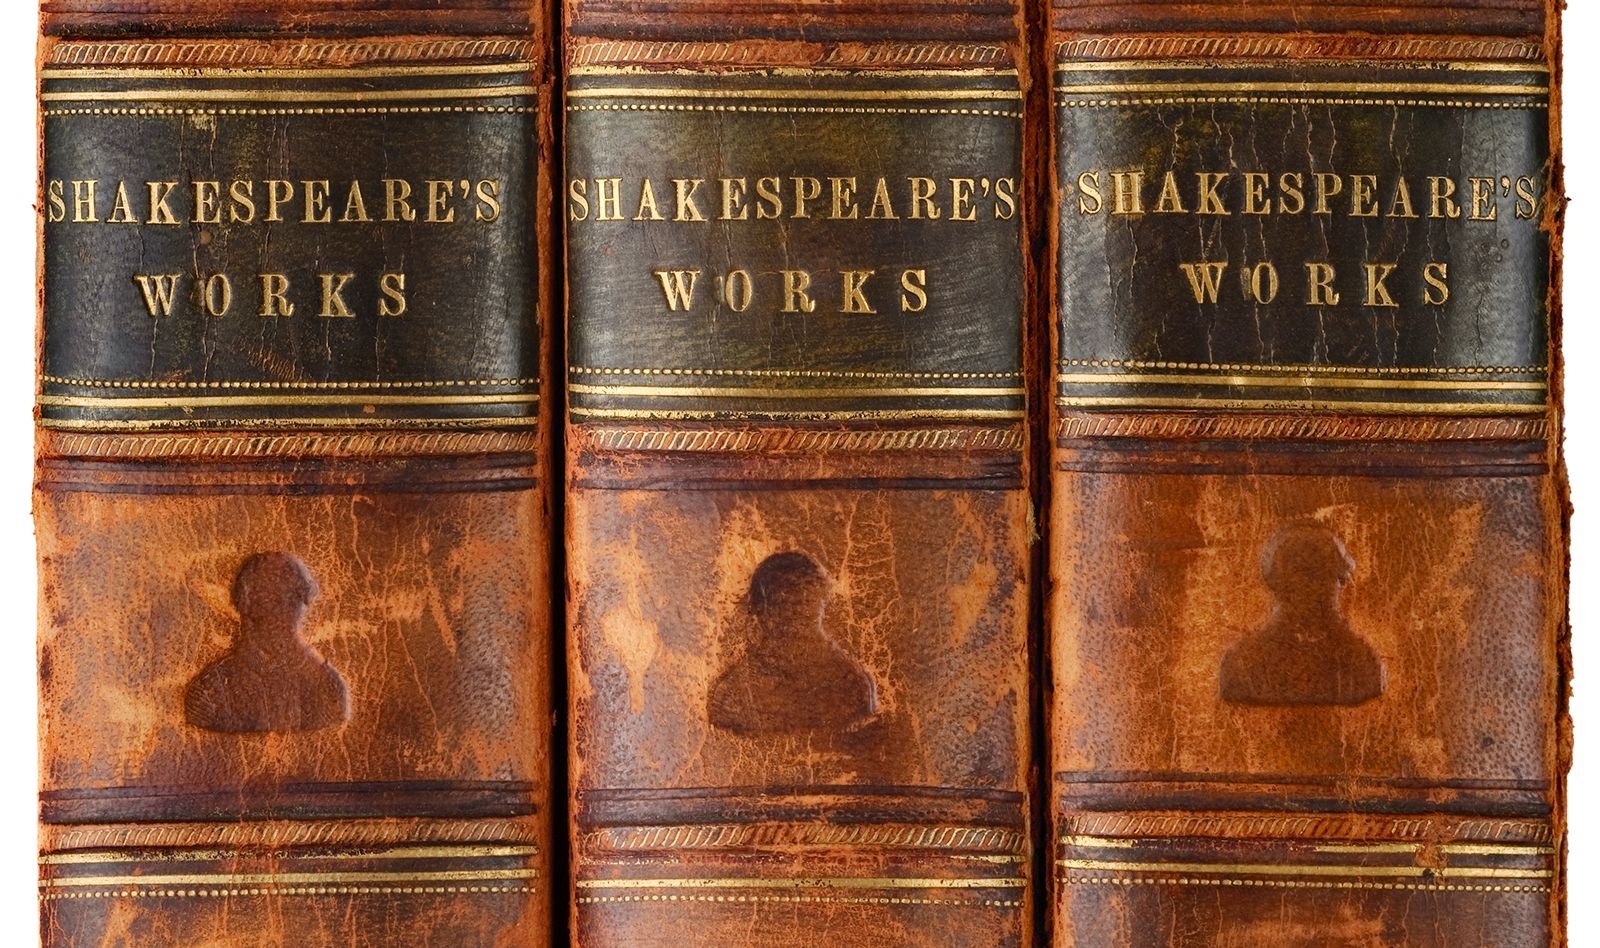 Three old leather-bound books of Shakespeare's works